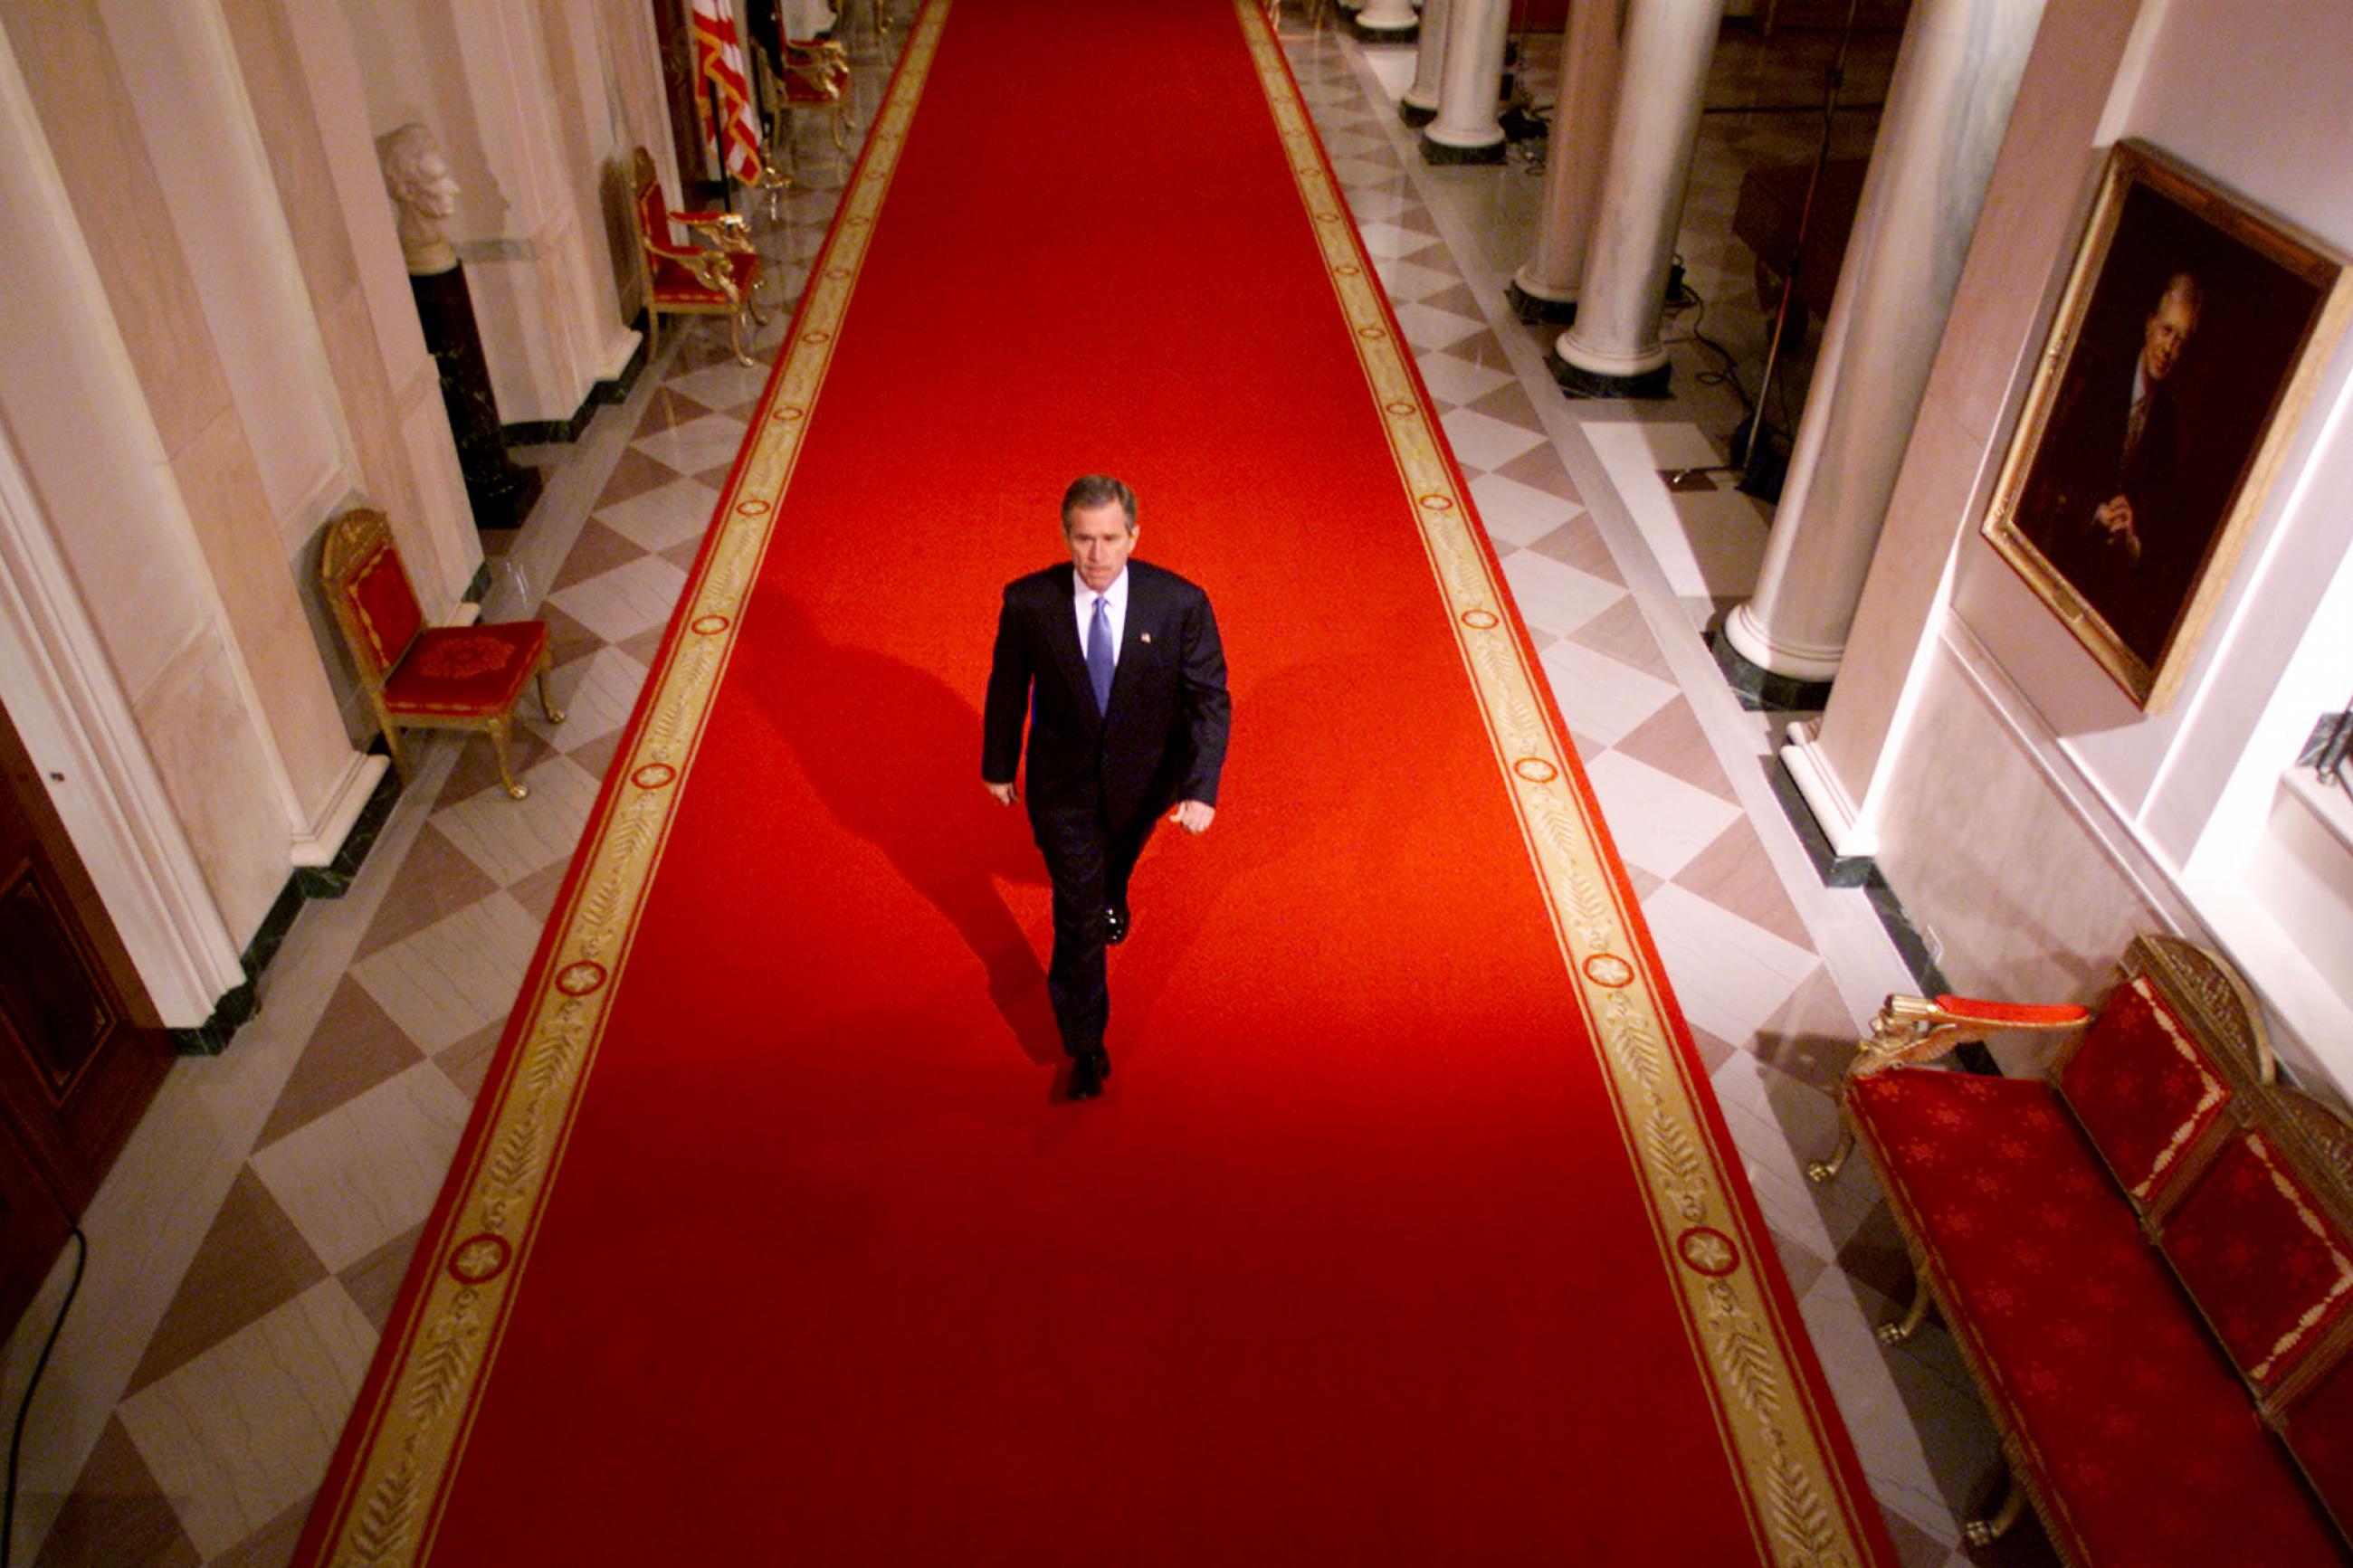 George W Bush walks down the White house halls to the address the nation on the attacks on 9/11